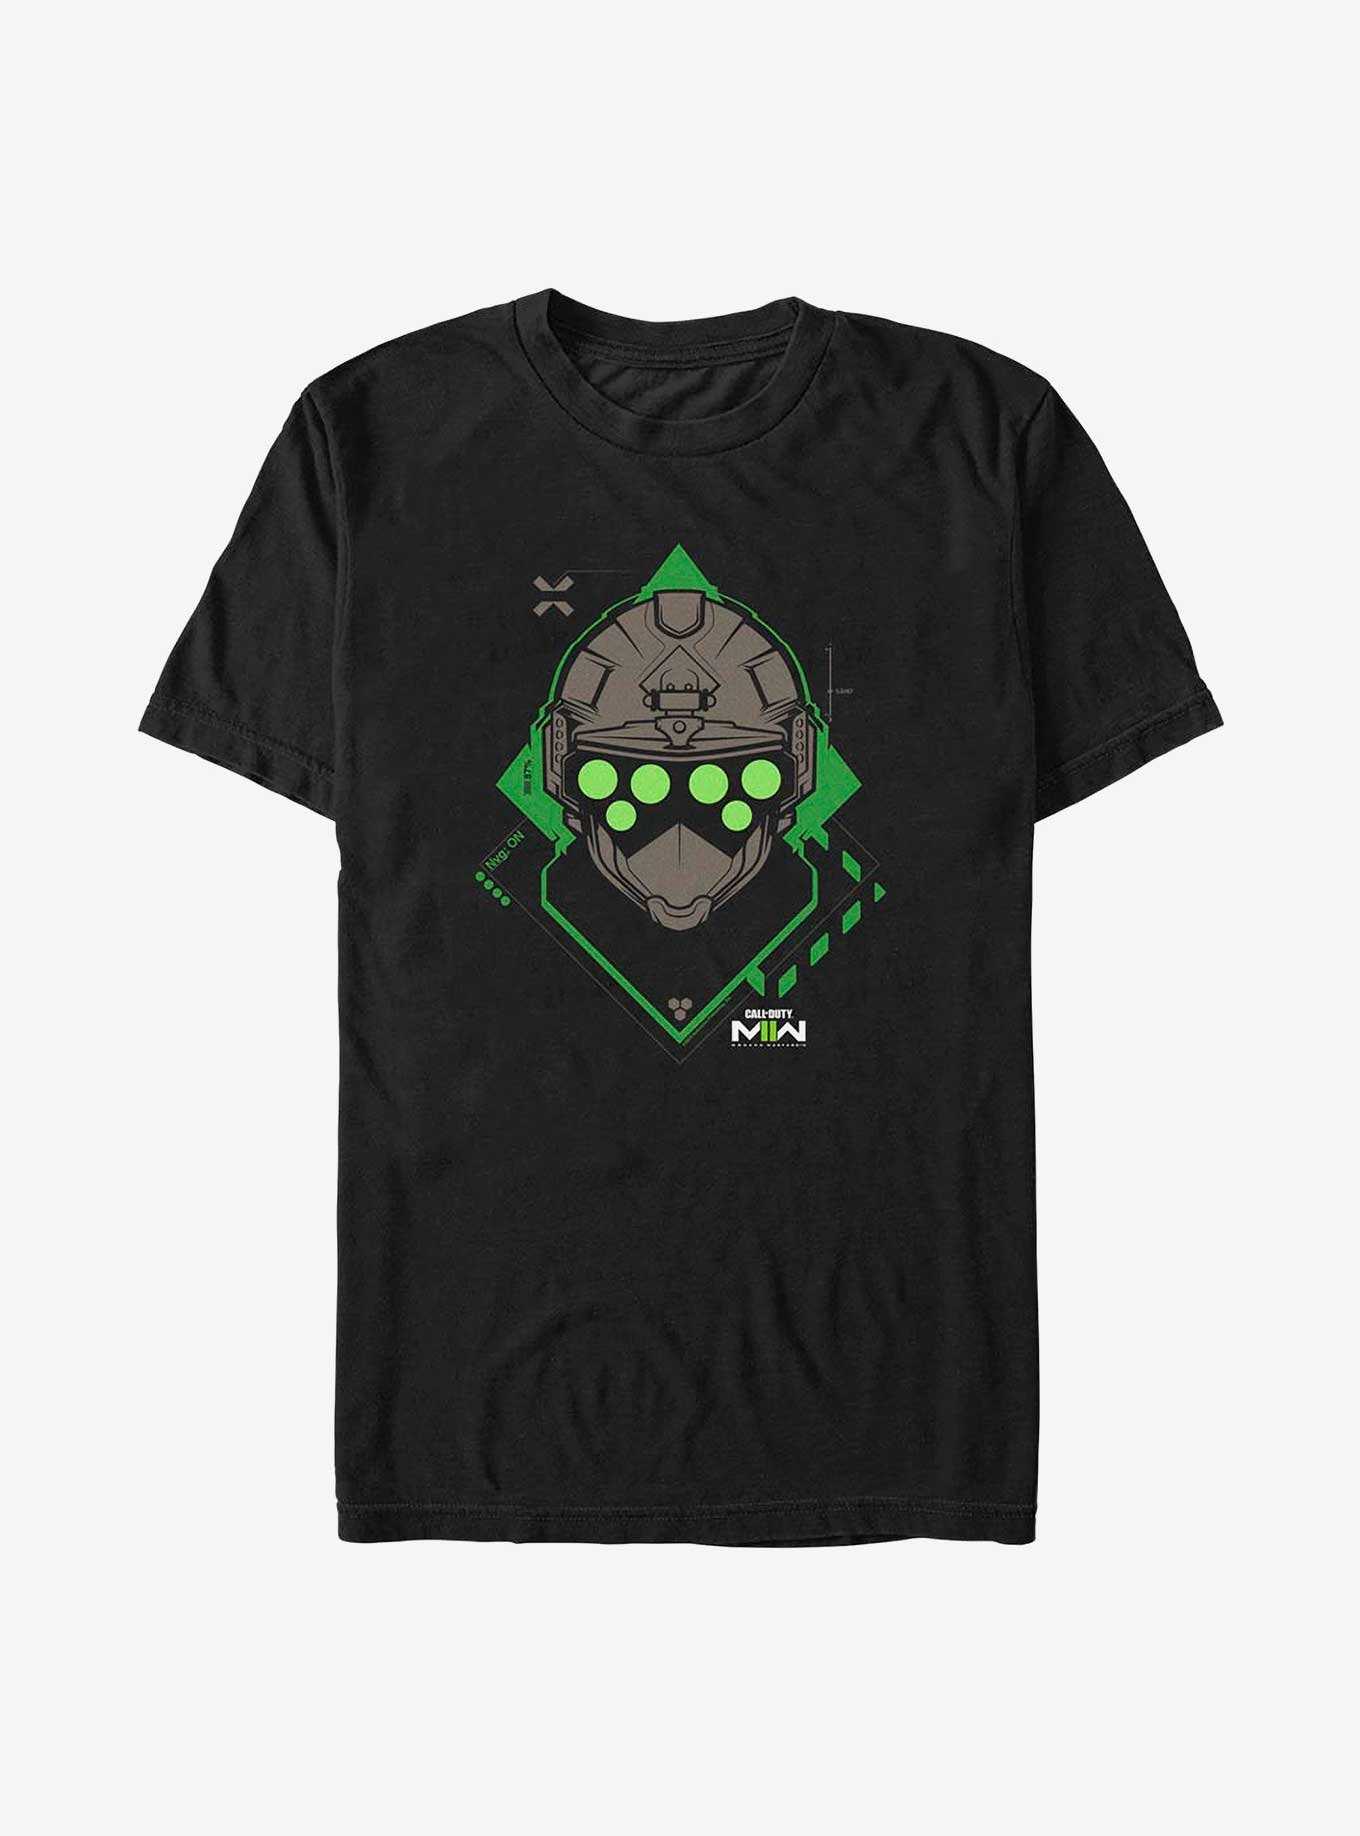 Call Of Duty Night Vision On T-Shirt, , hi-res